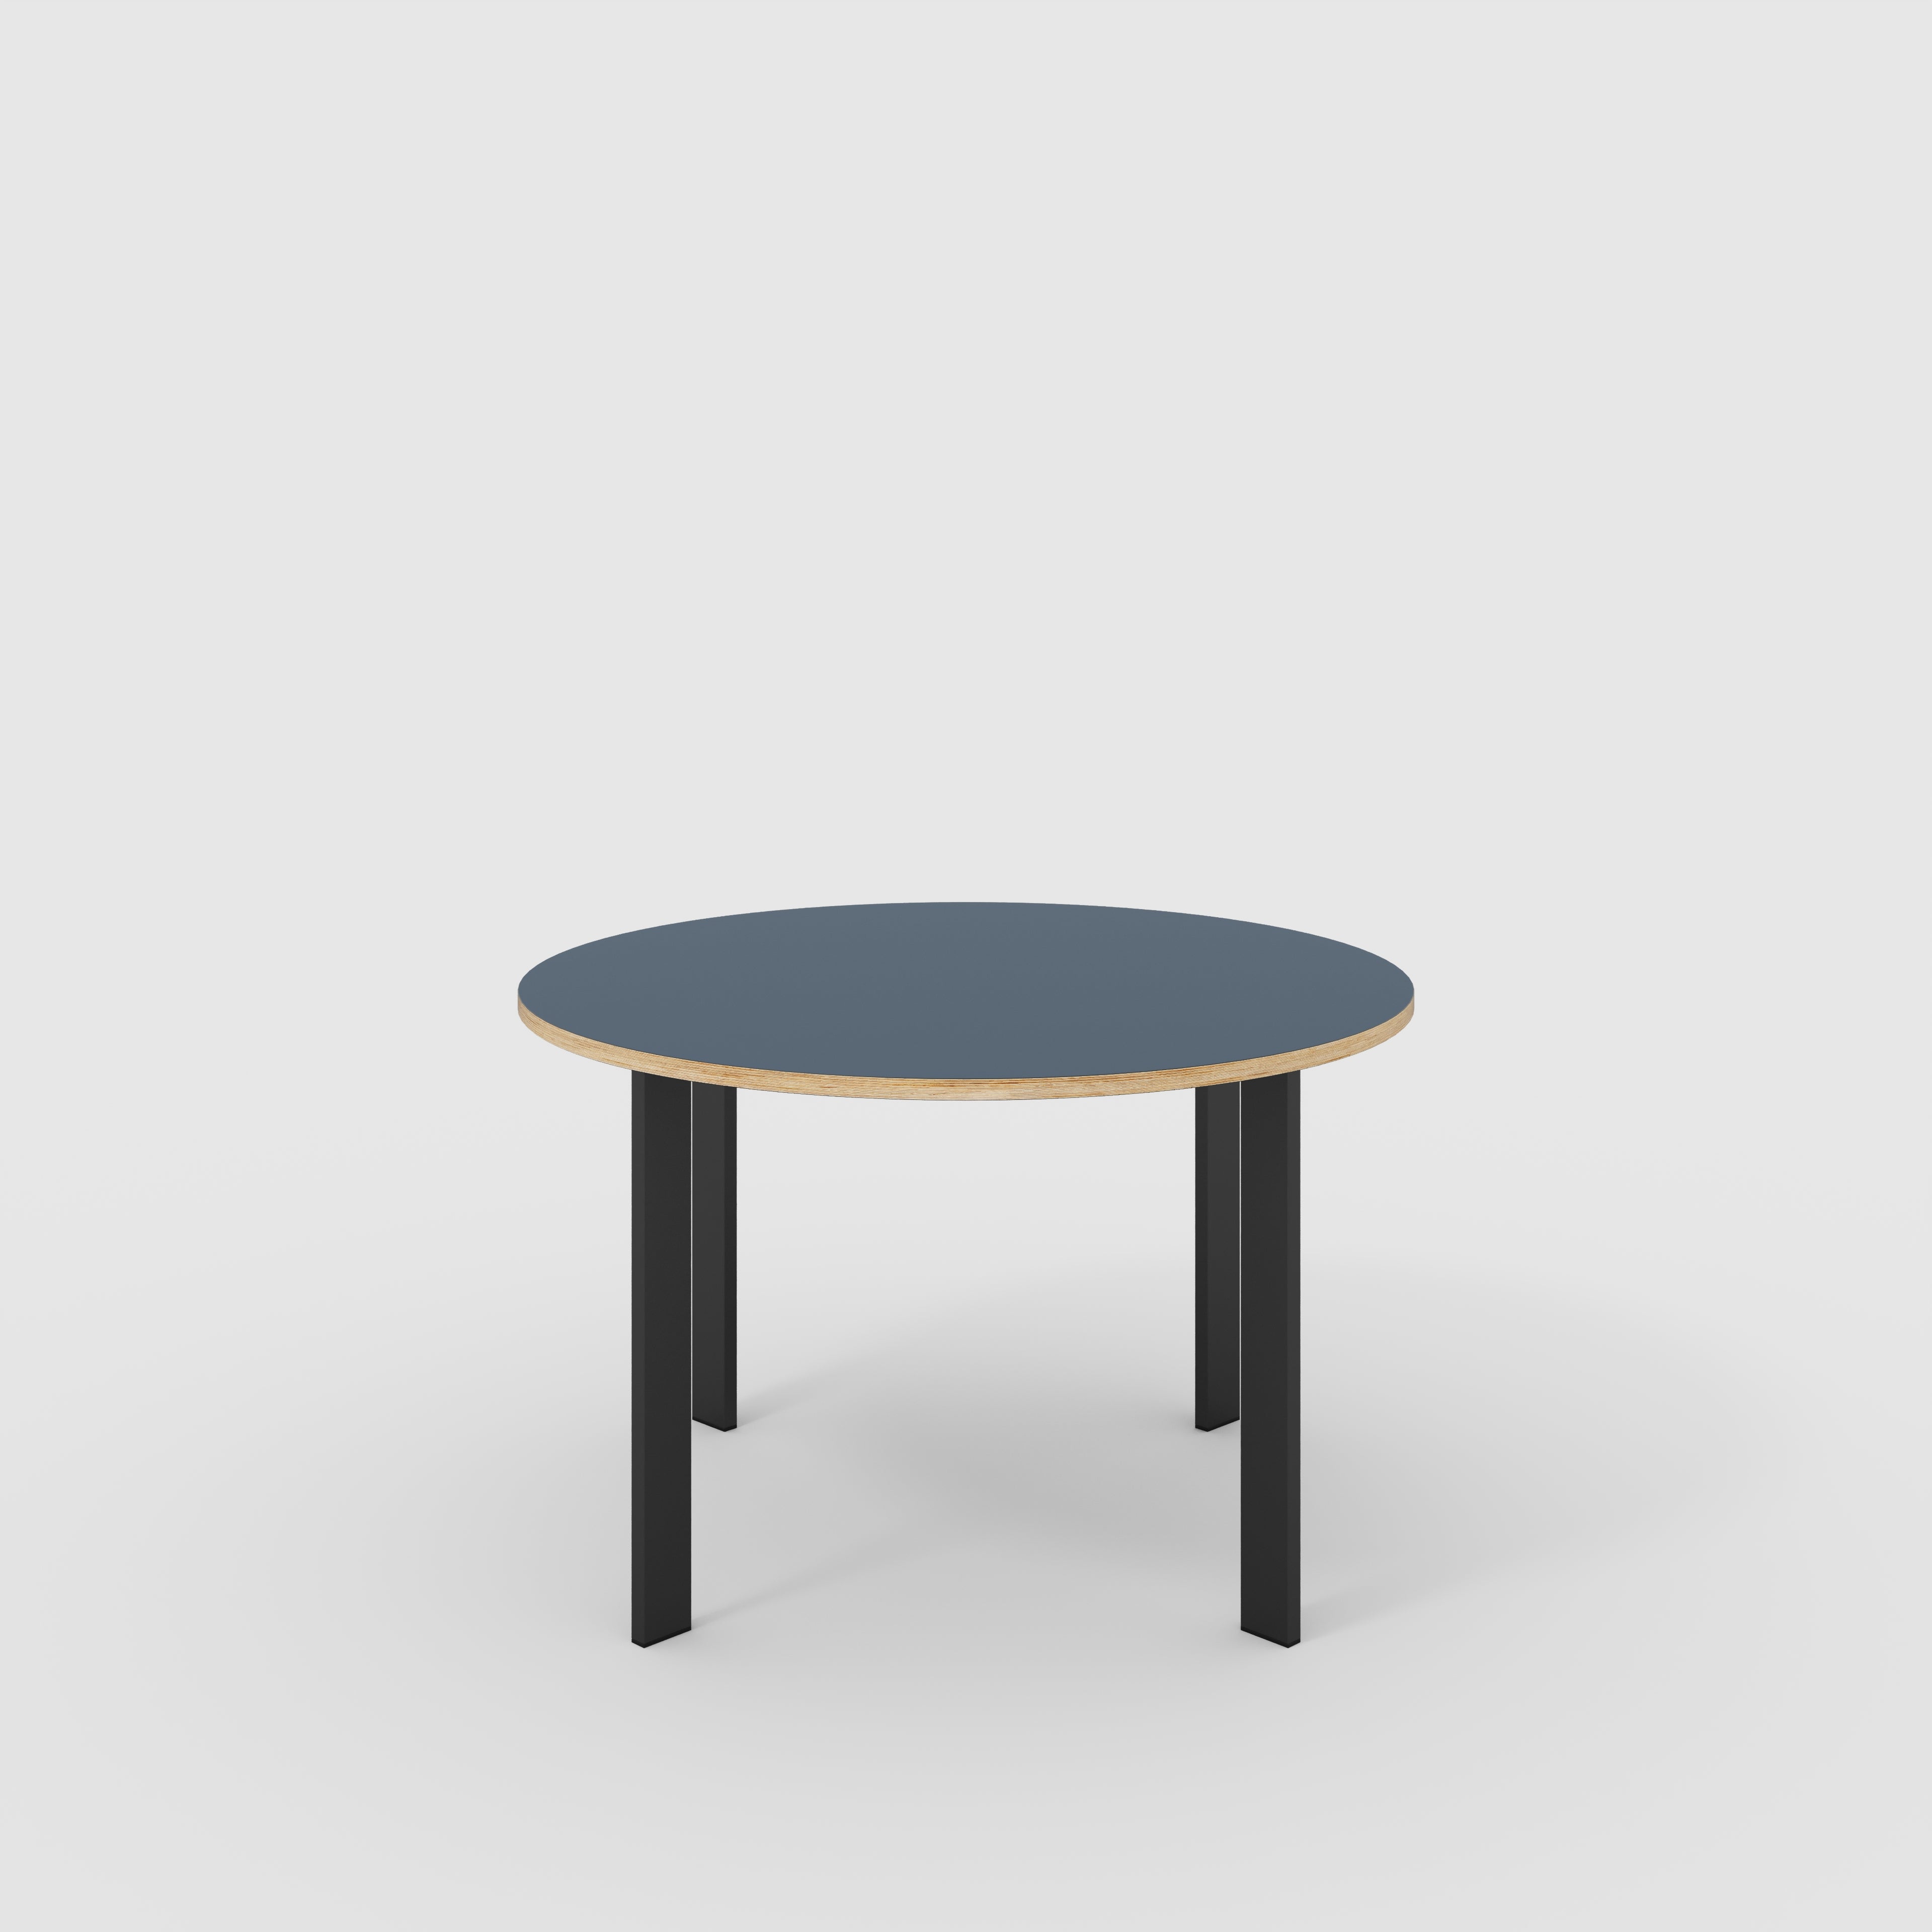 Round Table with Black Rectangular Single Pin Legs - Formica Night Sea Blue - 1200(dia) x 735(h)